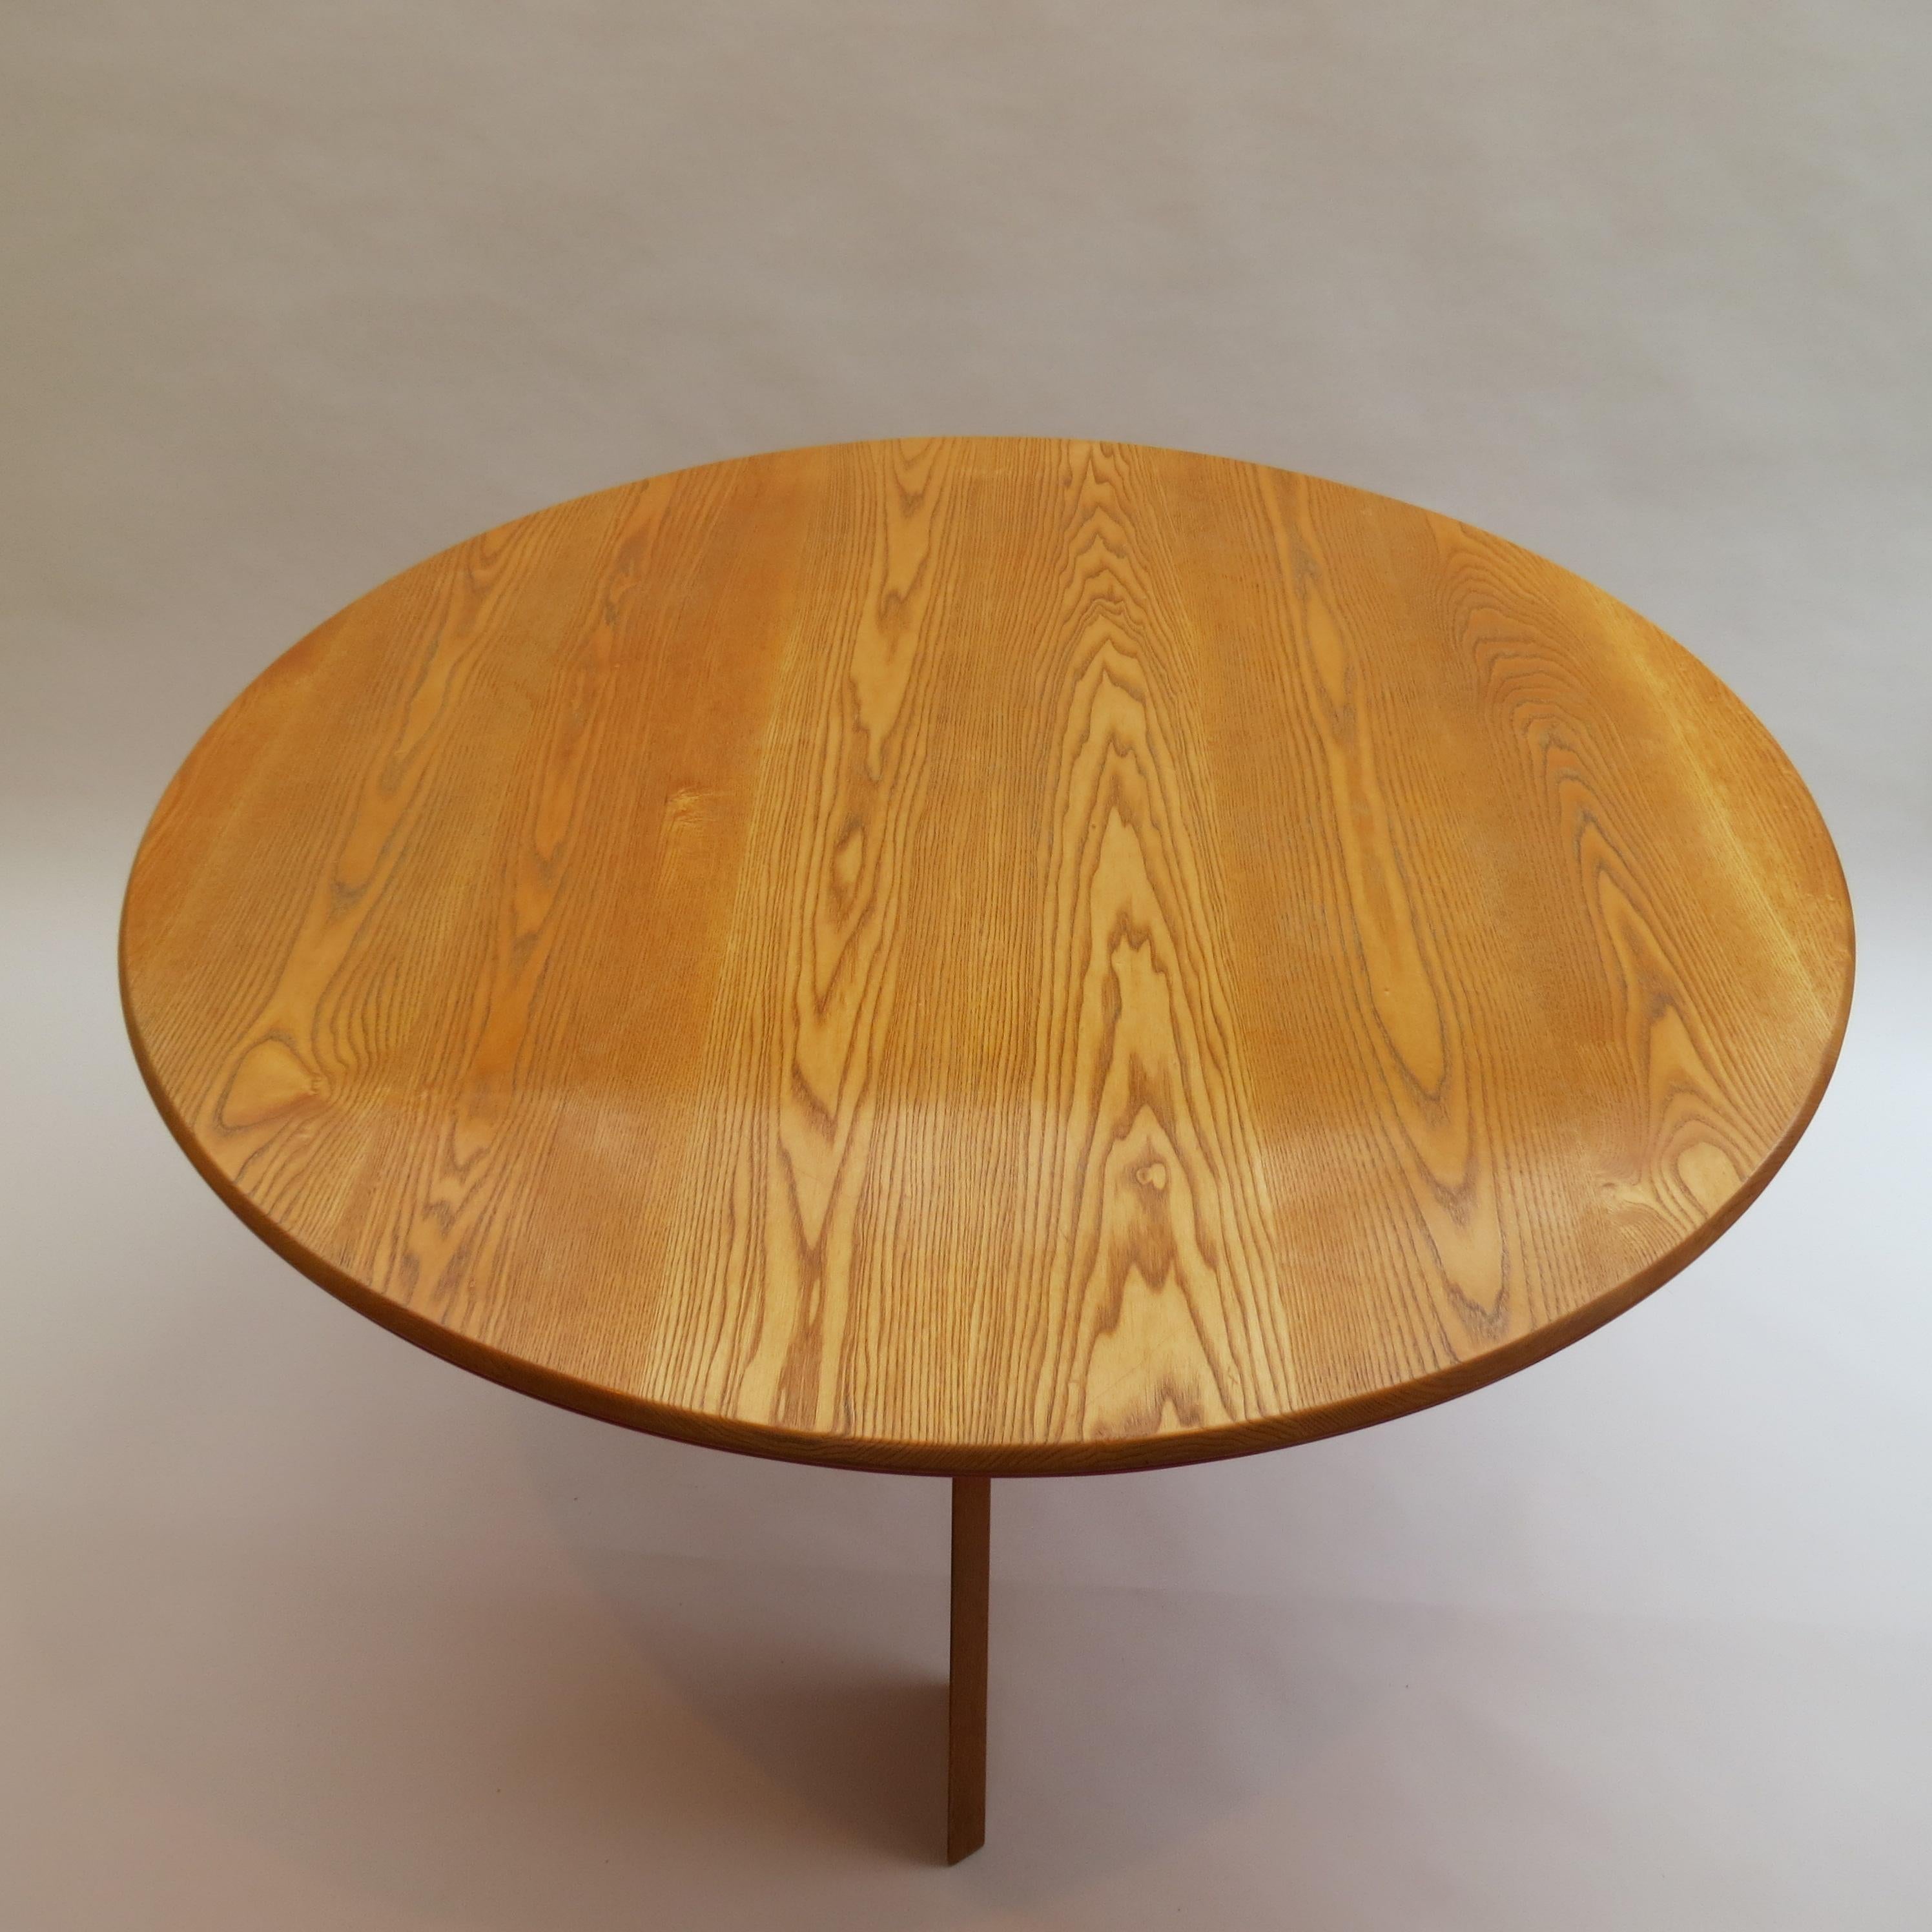 Midcentury Bespoke Round Dining Table by David Field 1980s with Red and Blue Det In Good Condition In Stow on the Wold, GB